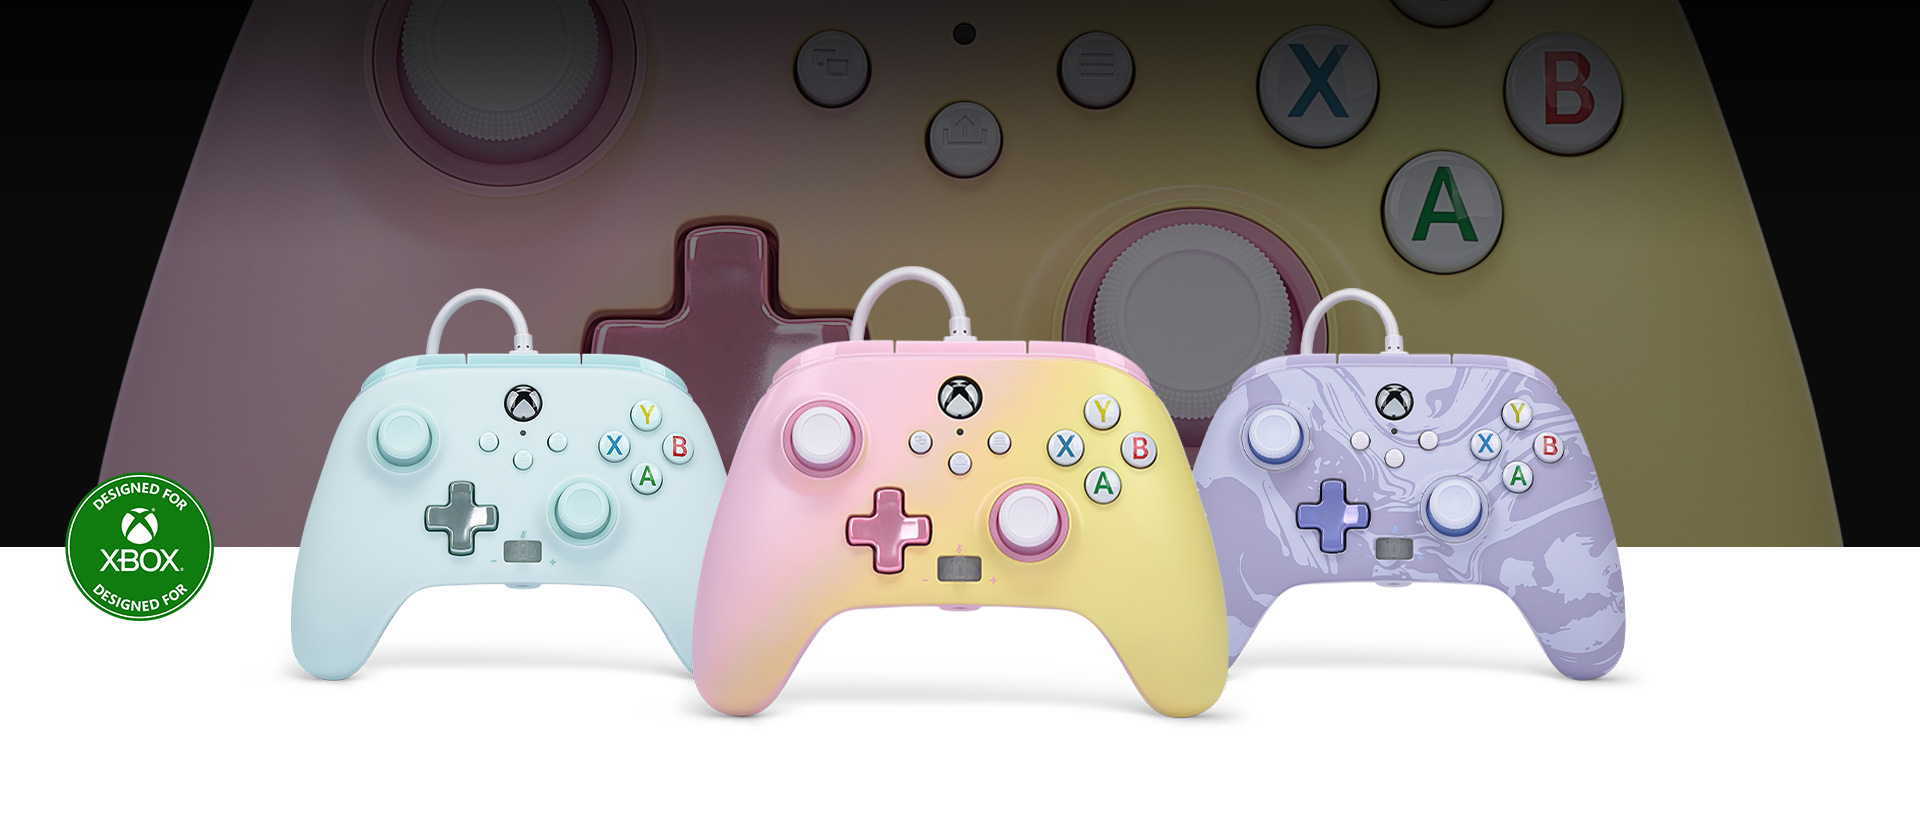 Designed for Xbox logo, Pink Lemonade controller in front with the Cotton Candy Blue and Lavender Swirl controllers beside it